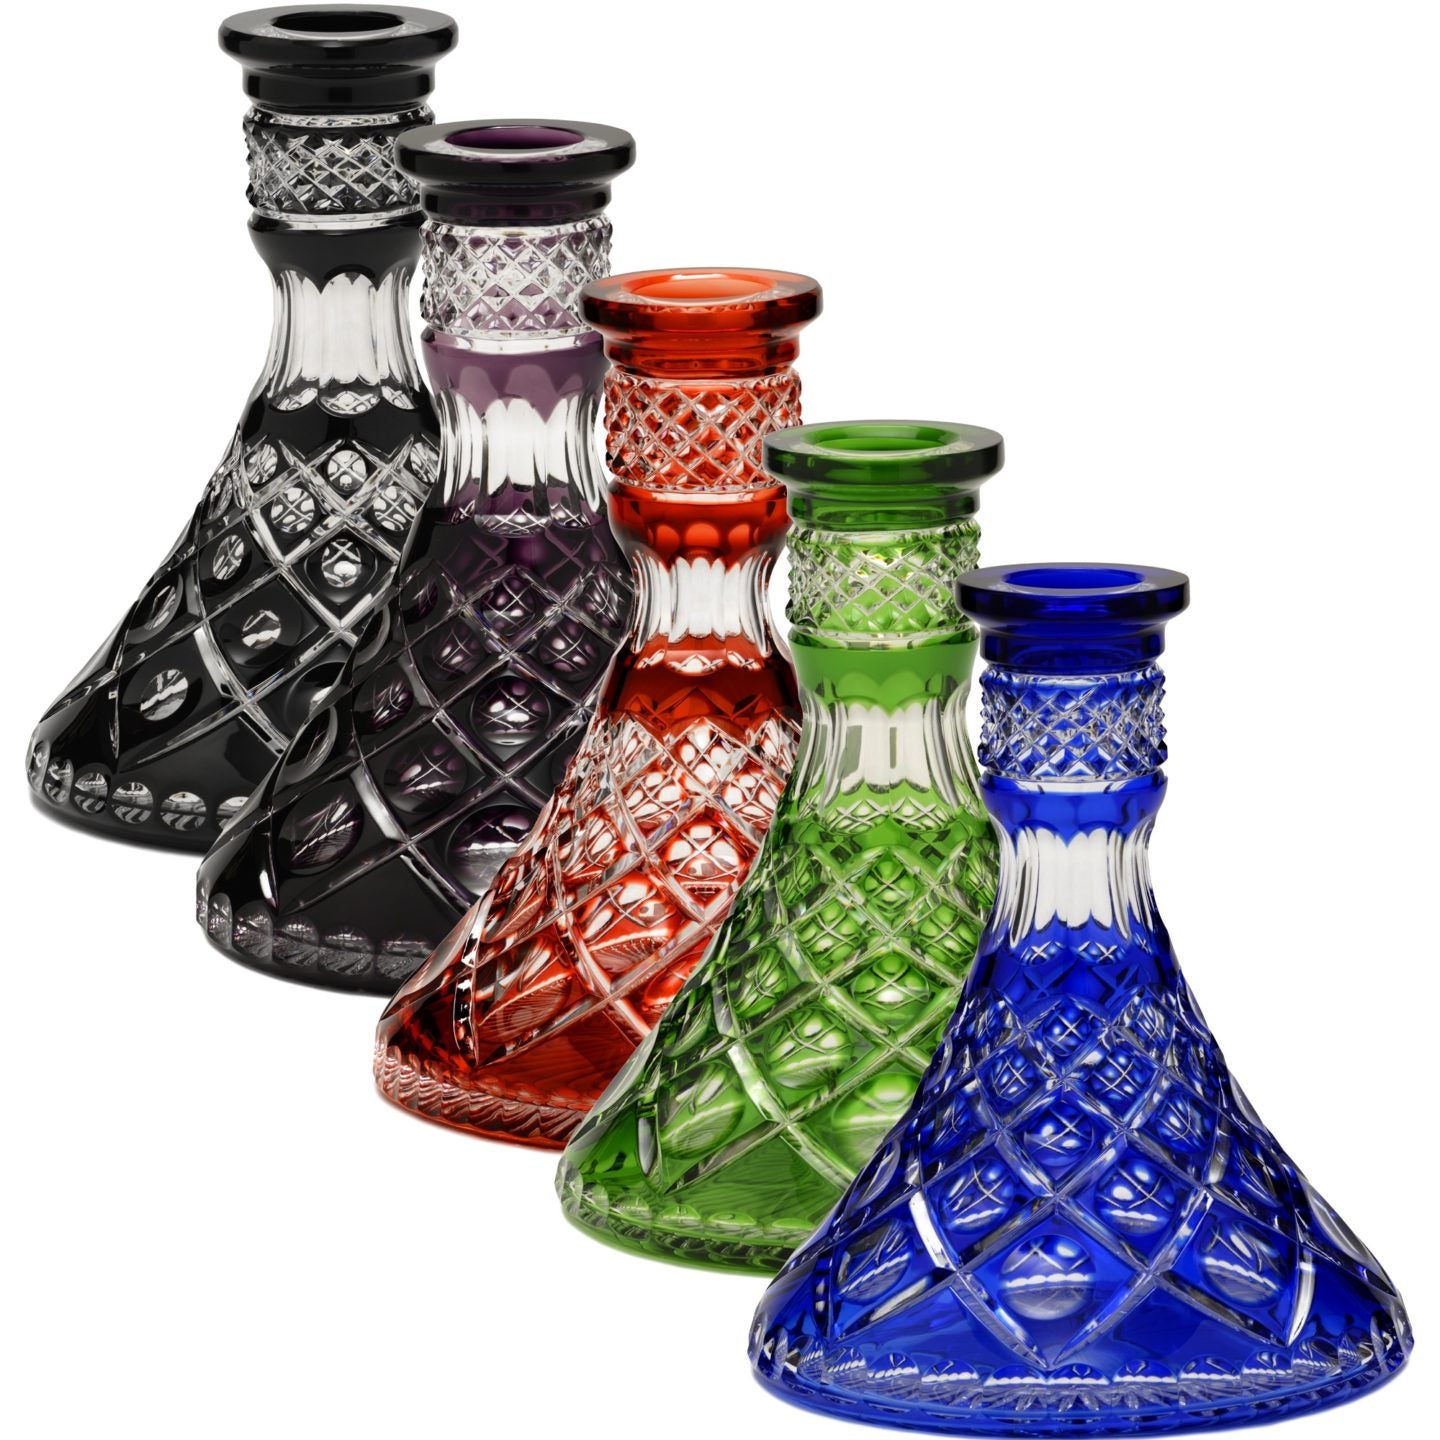 Sultan Crystal base all colors